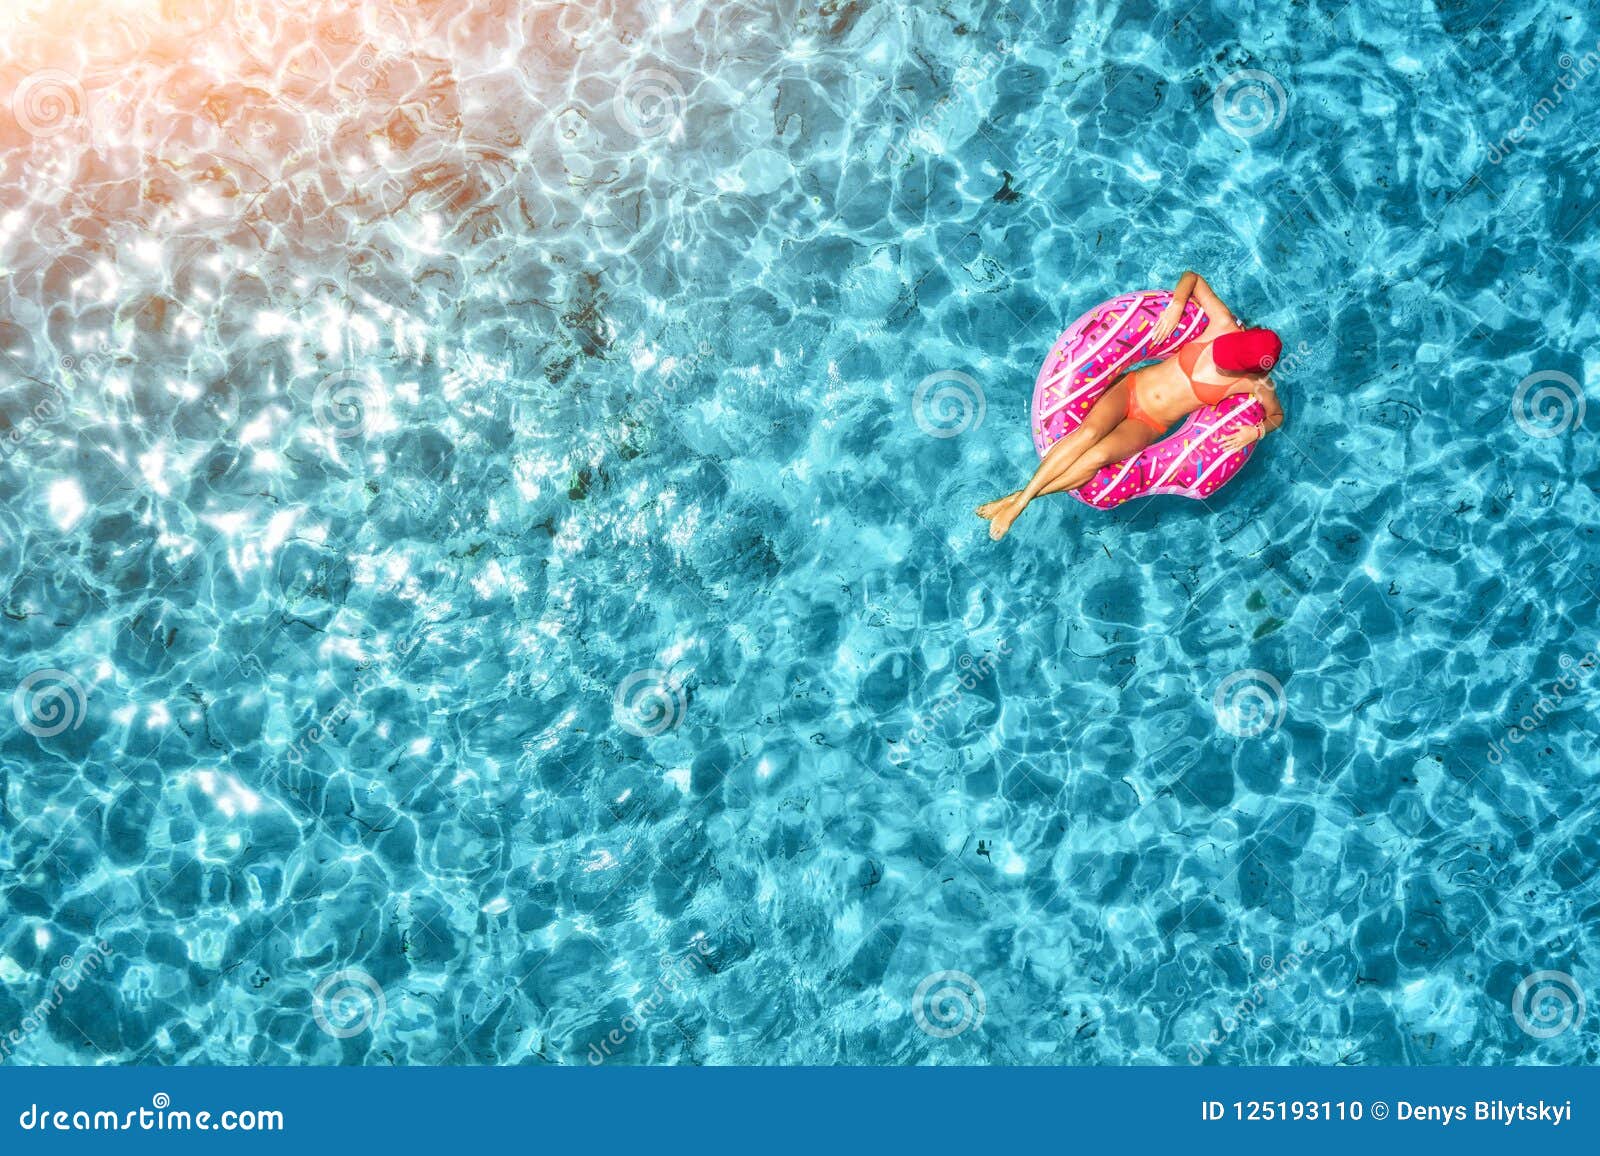 Aerial View of Woman Swimming on Donut Swim Ring in the Sea Stock Photo ...